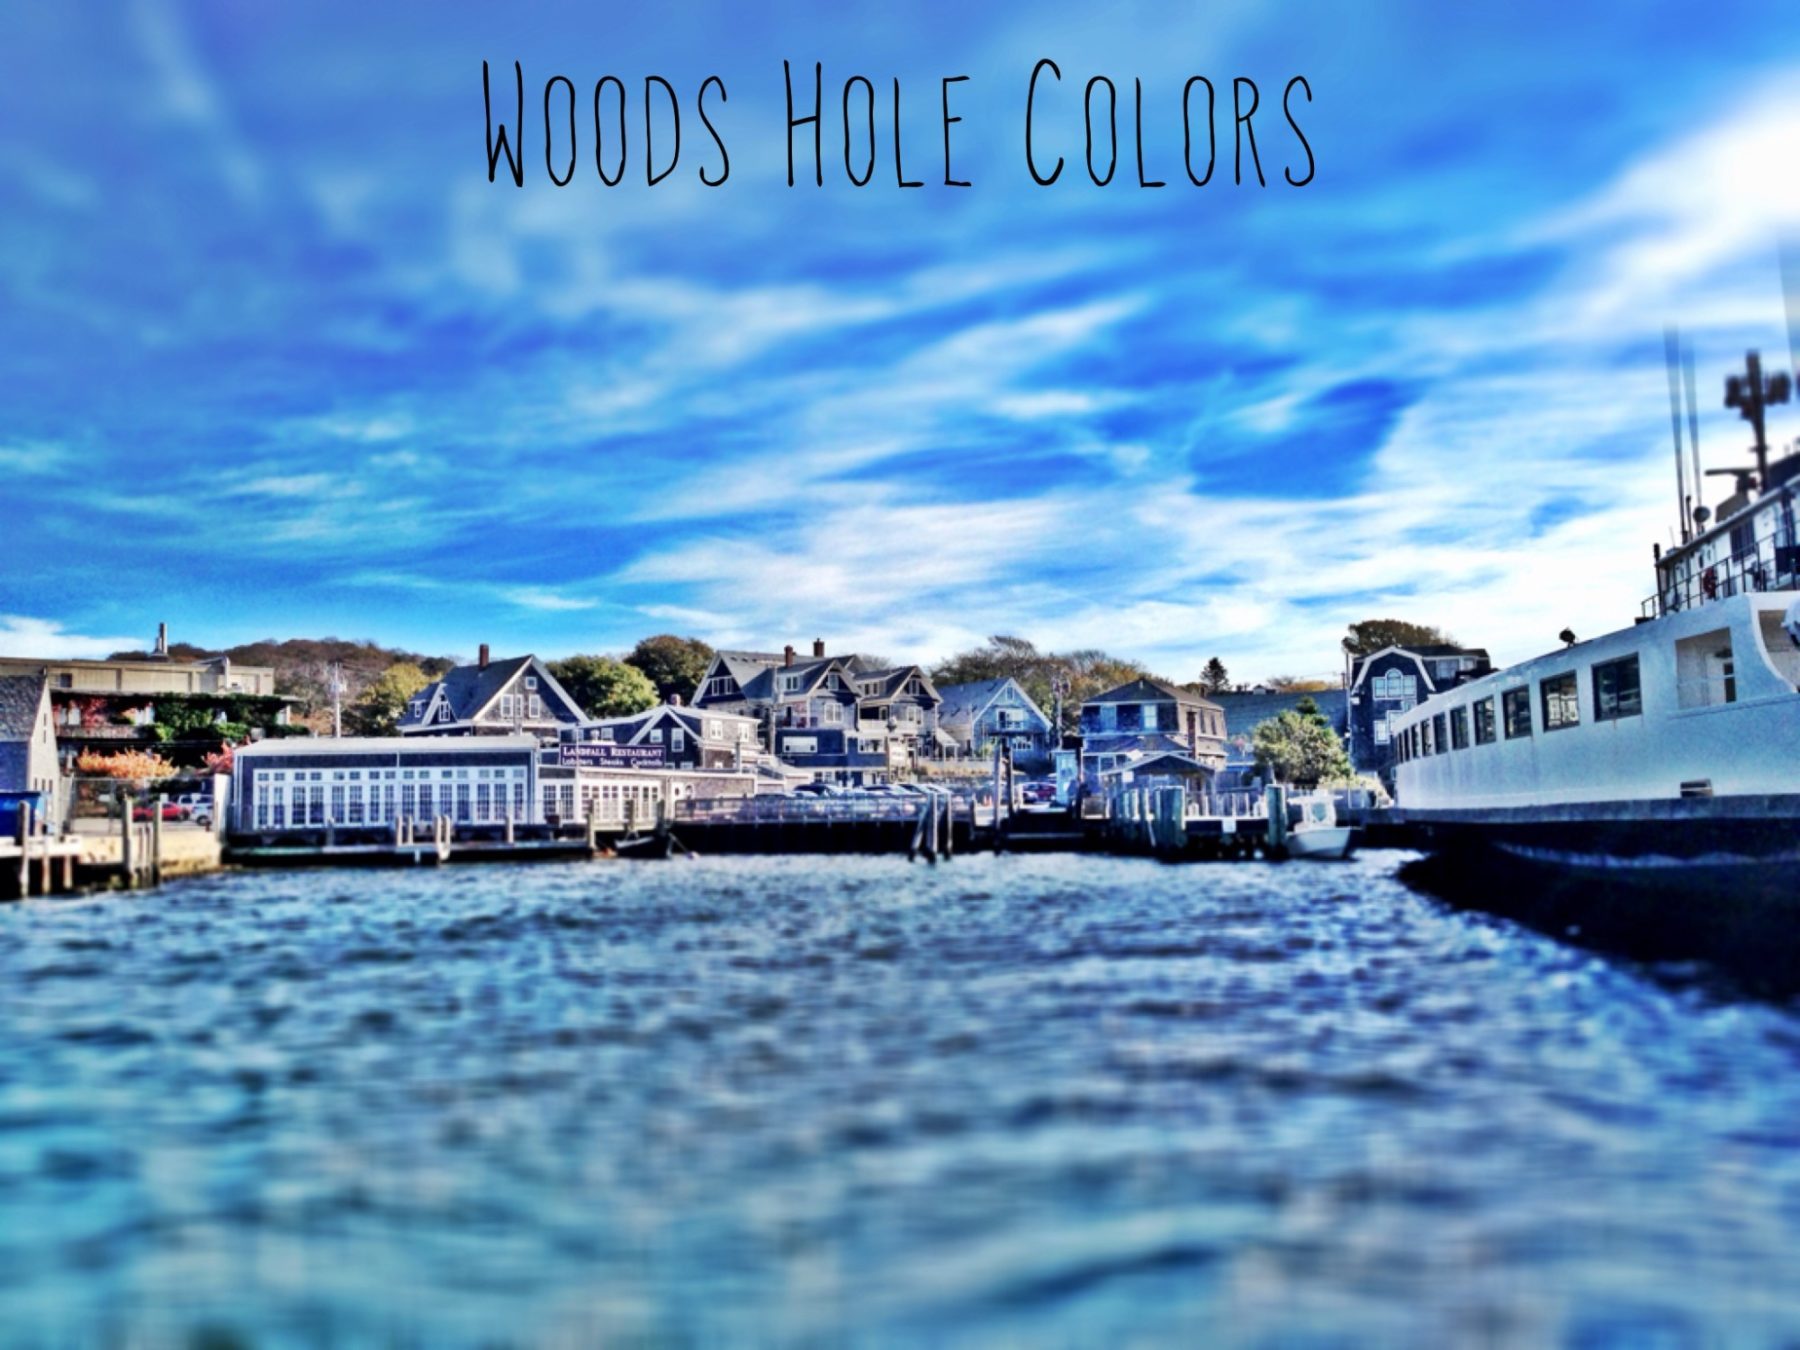 Fall Colors 2014 in Woods Hole